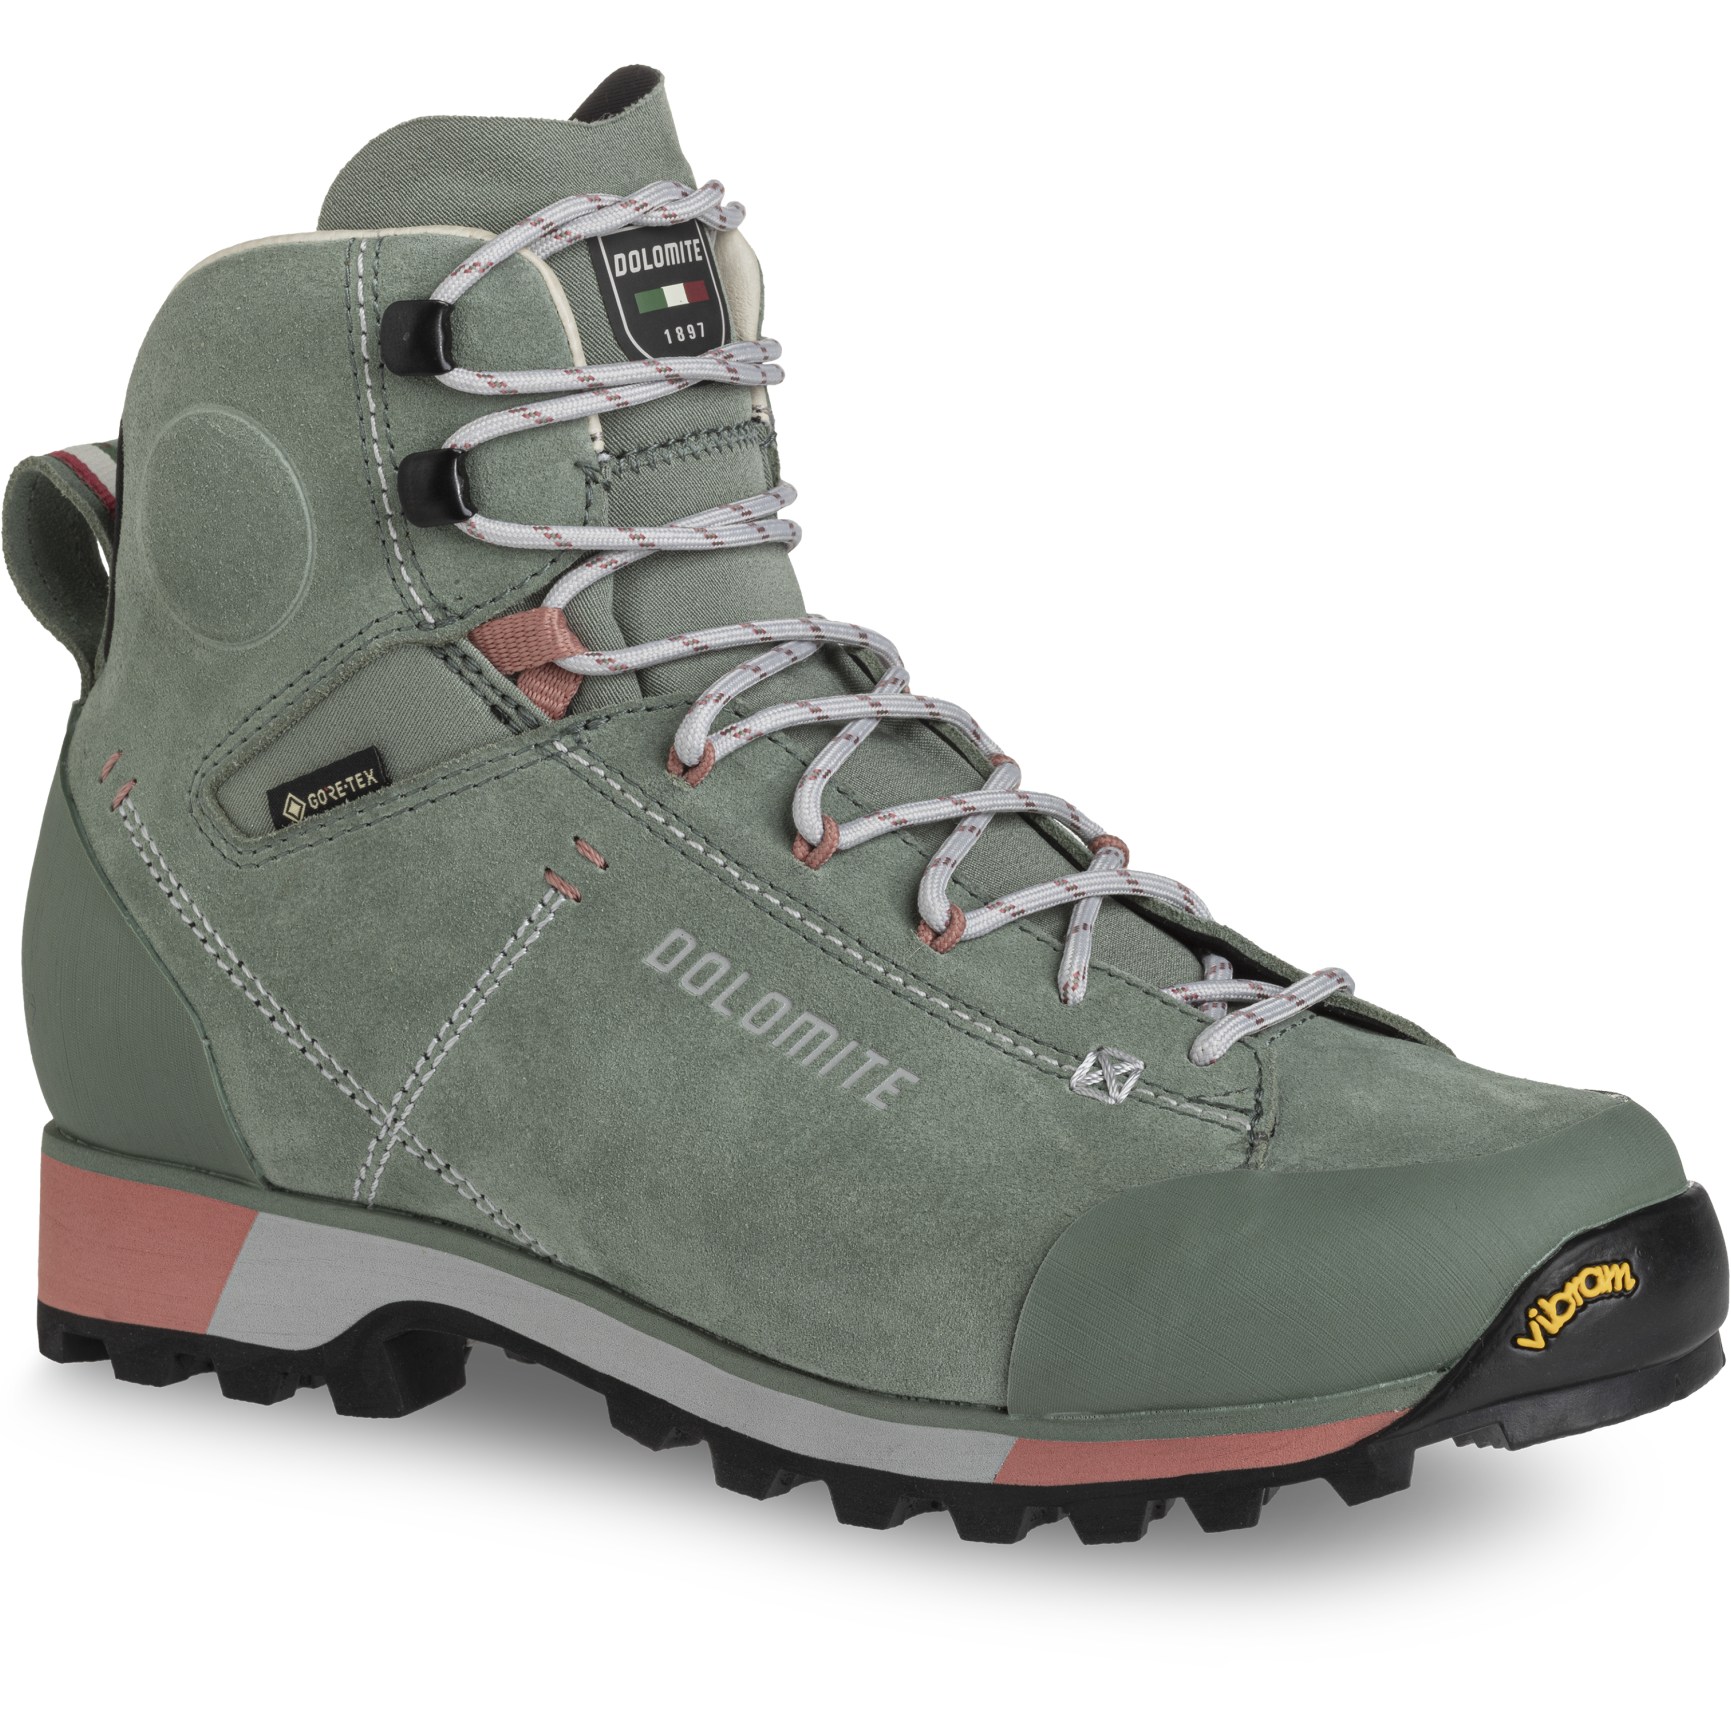 Picture of Dolomite 54 Hike Evo GTX Women&#039;s Hiking Shoes - sage green